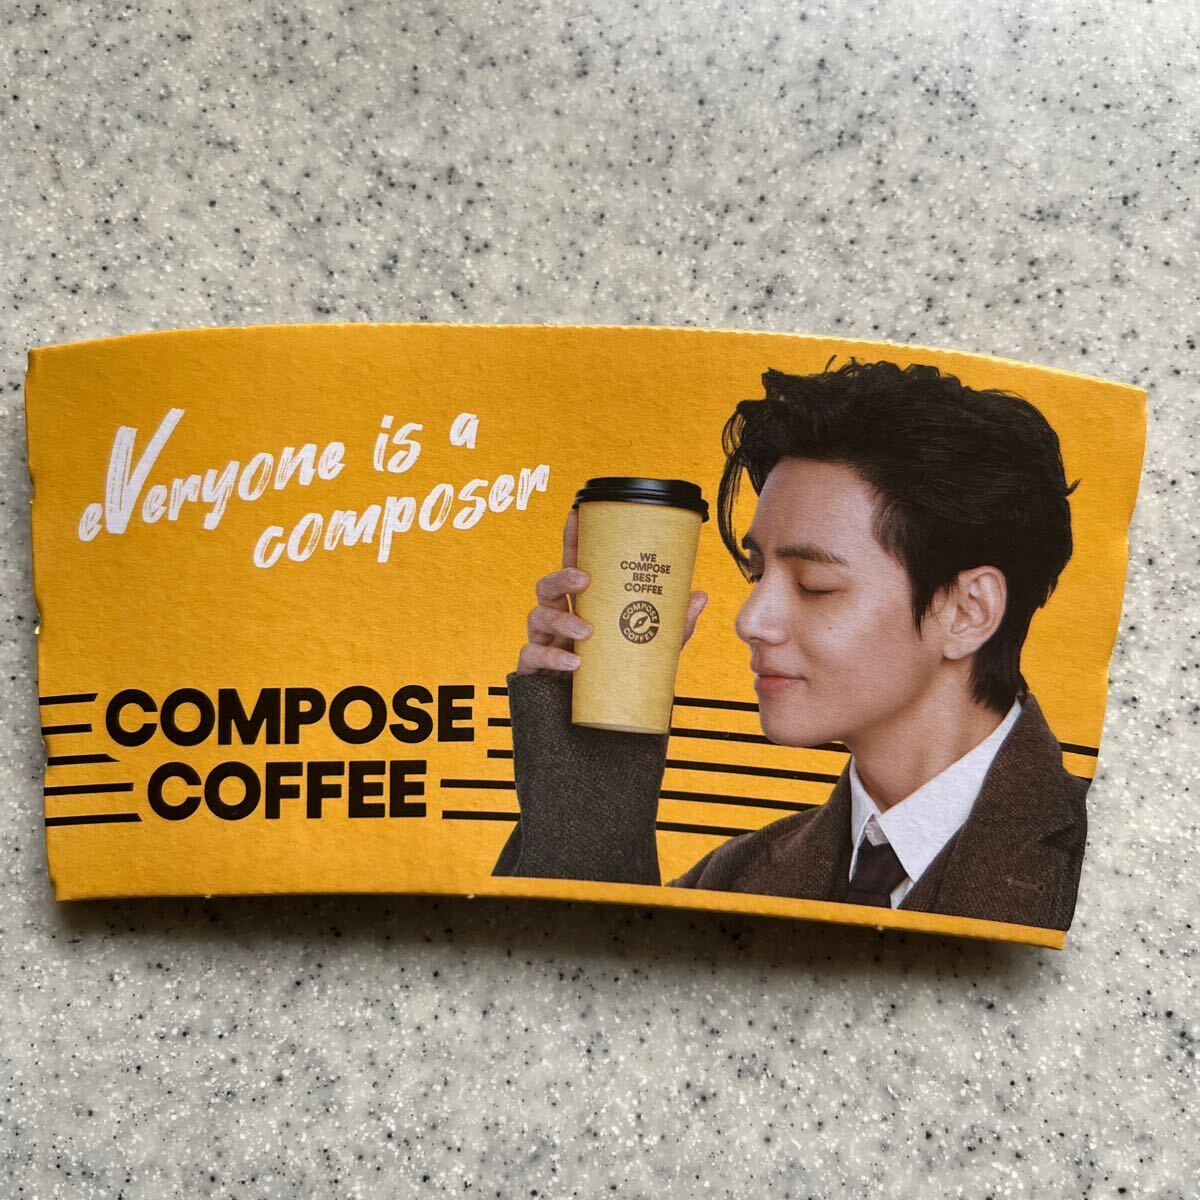 BTS Compose Coffee player -z coffee capsule ho Vtehyon3 piece together 